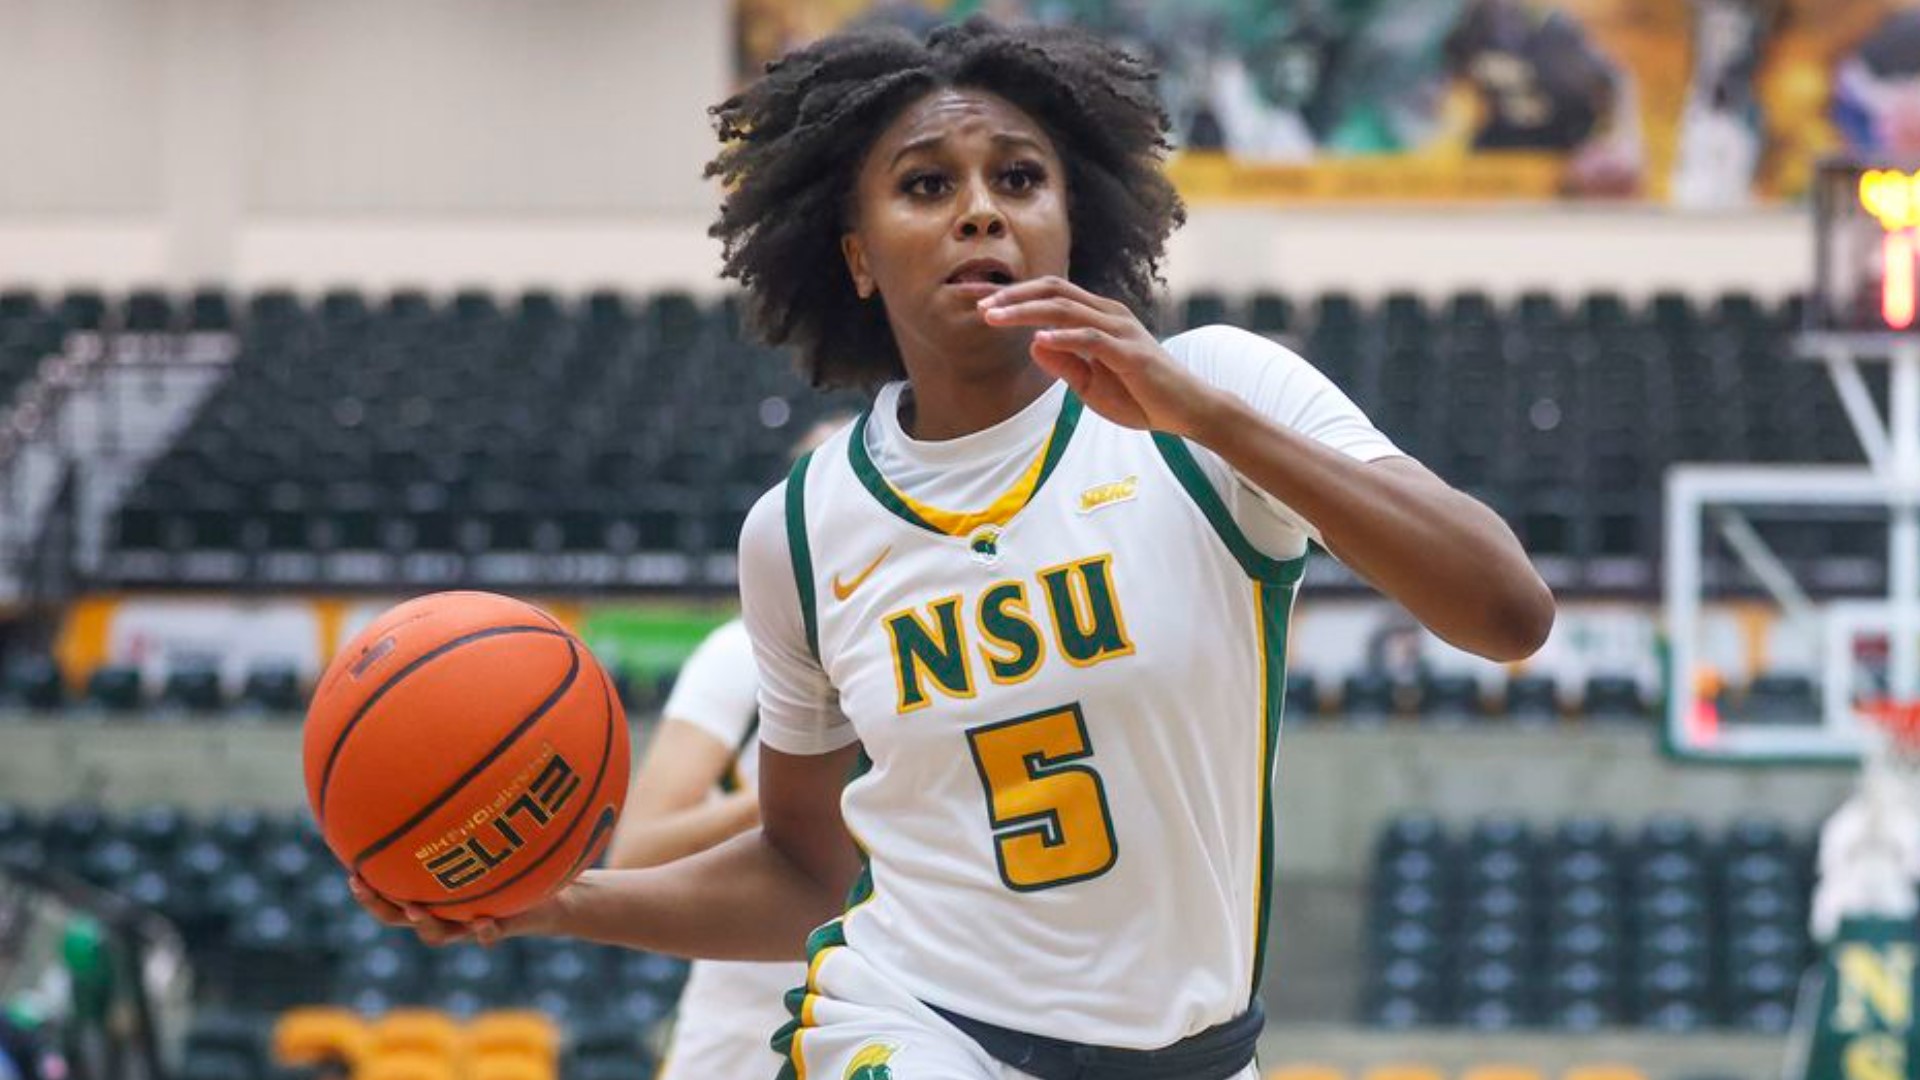 The victory extended Norfolk State's winning streak to seven games heading into Saturday's matchup against NJIT at Echols Hall.